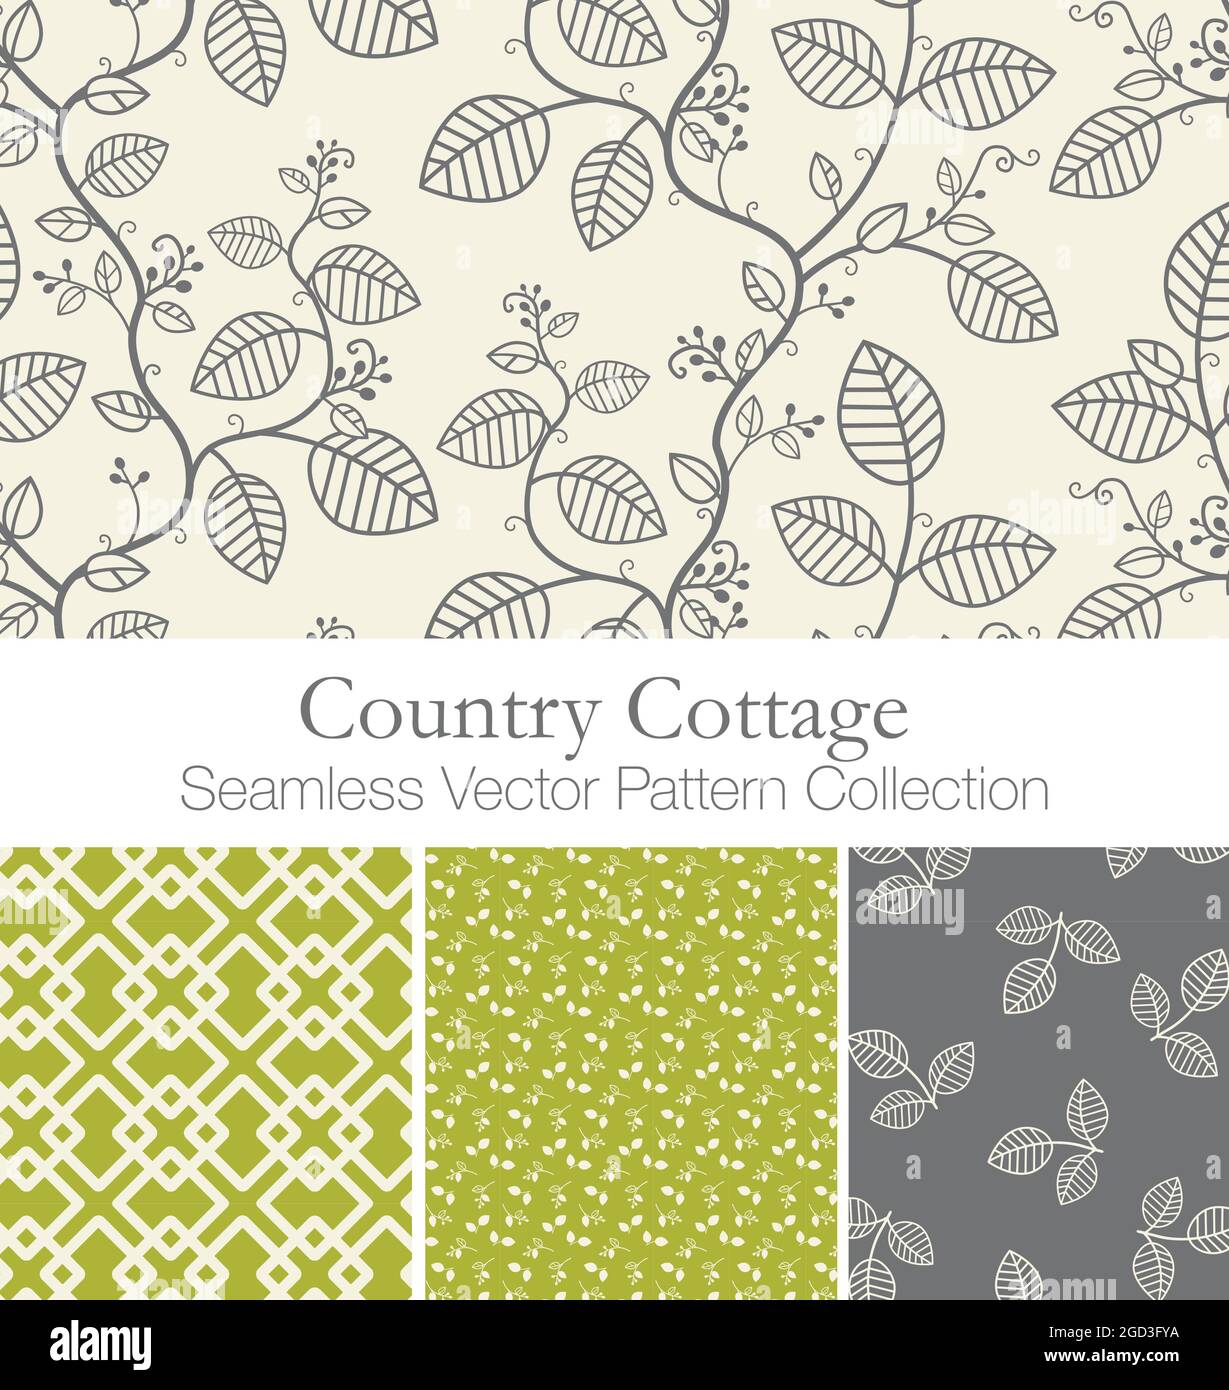 Charming Country Cottage Seamless Vector Patterns Stock Vector